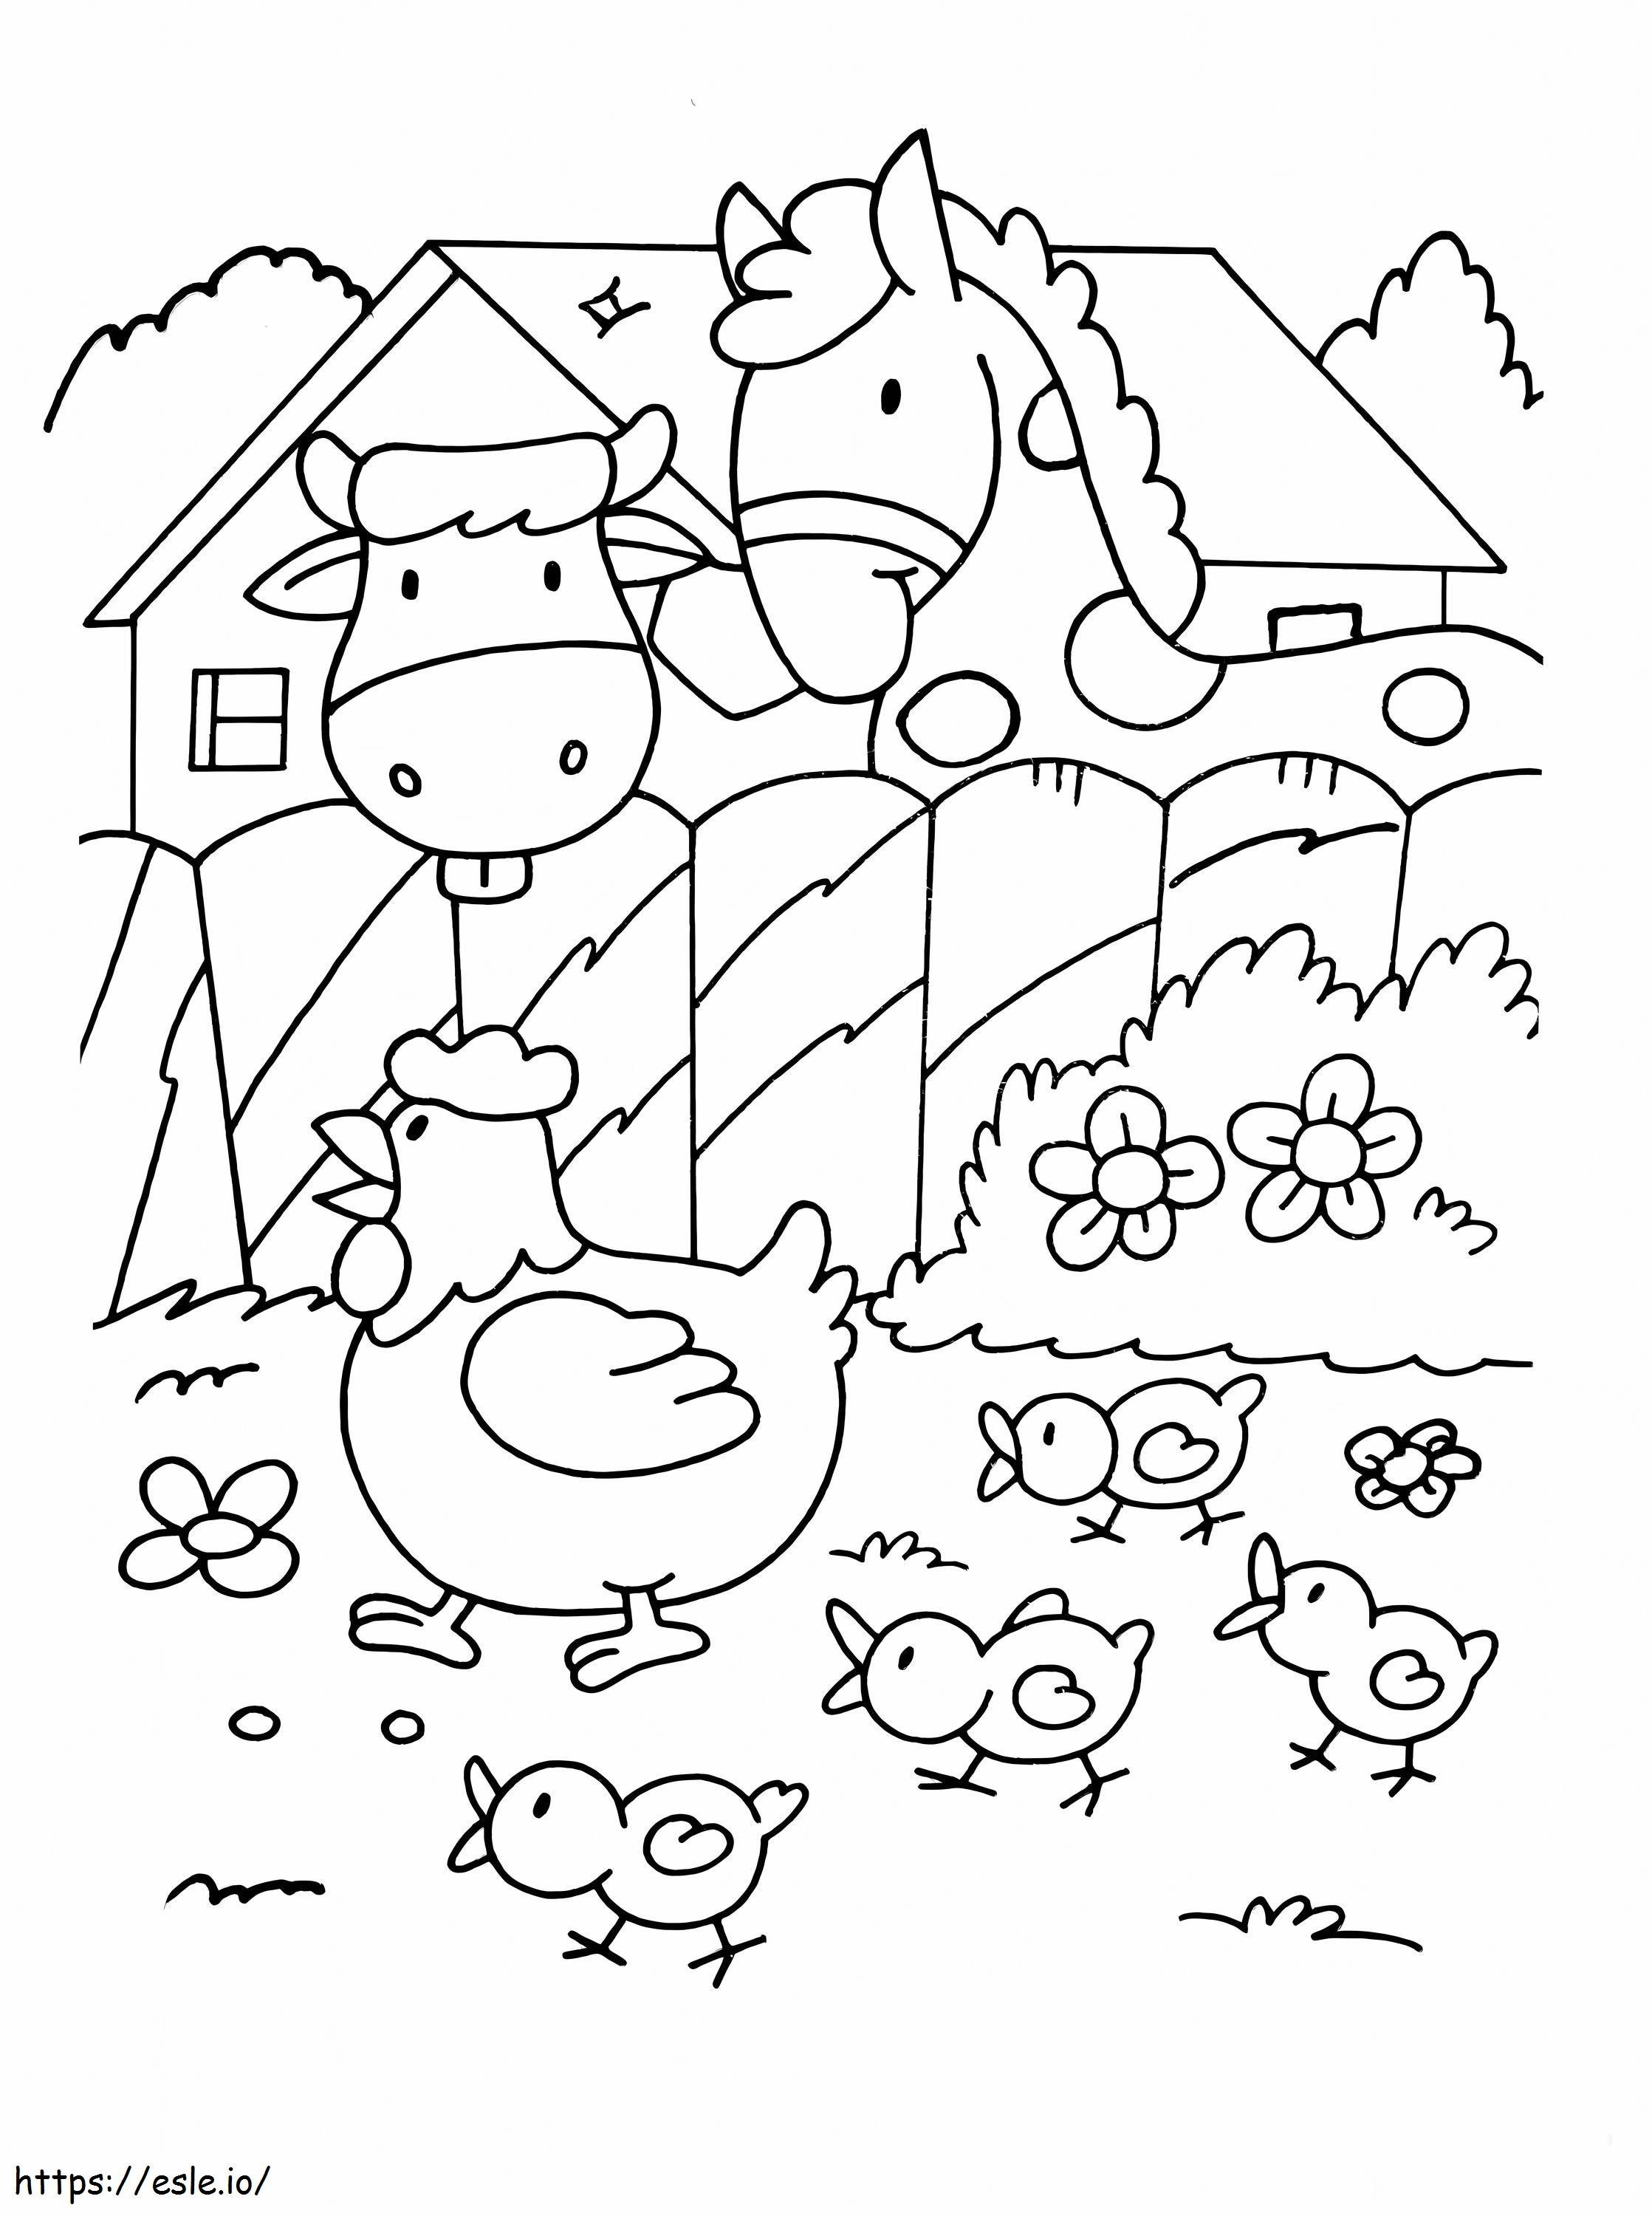 Chicken Horse And Cow On The Farm coloring page